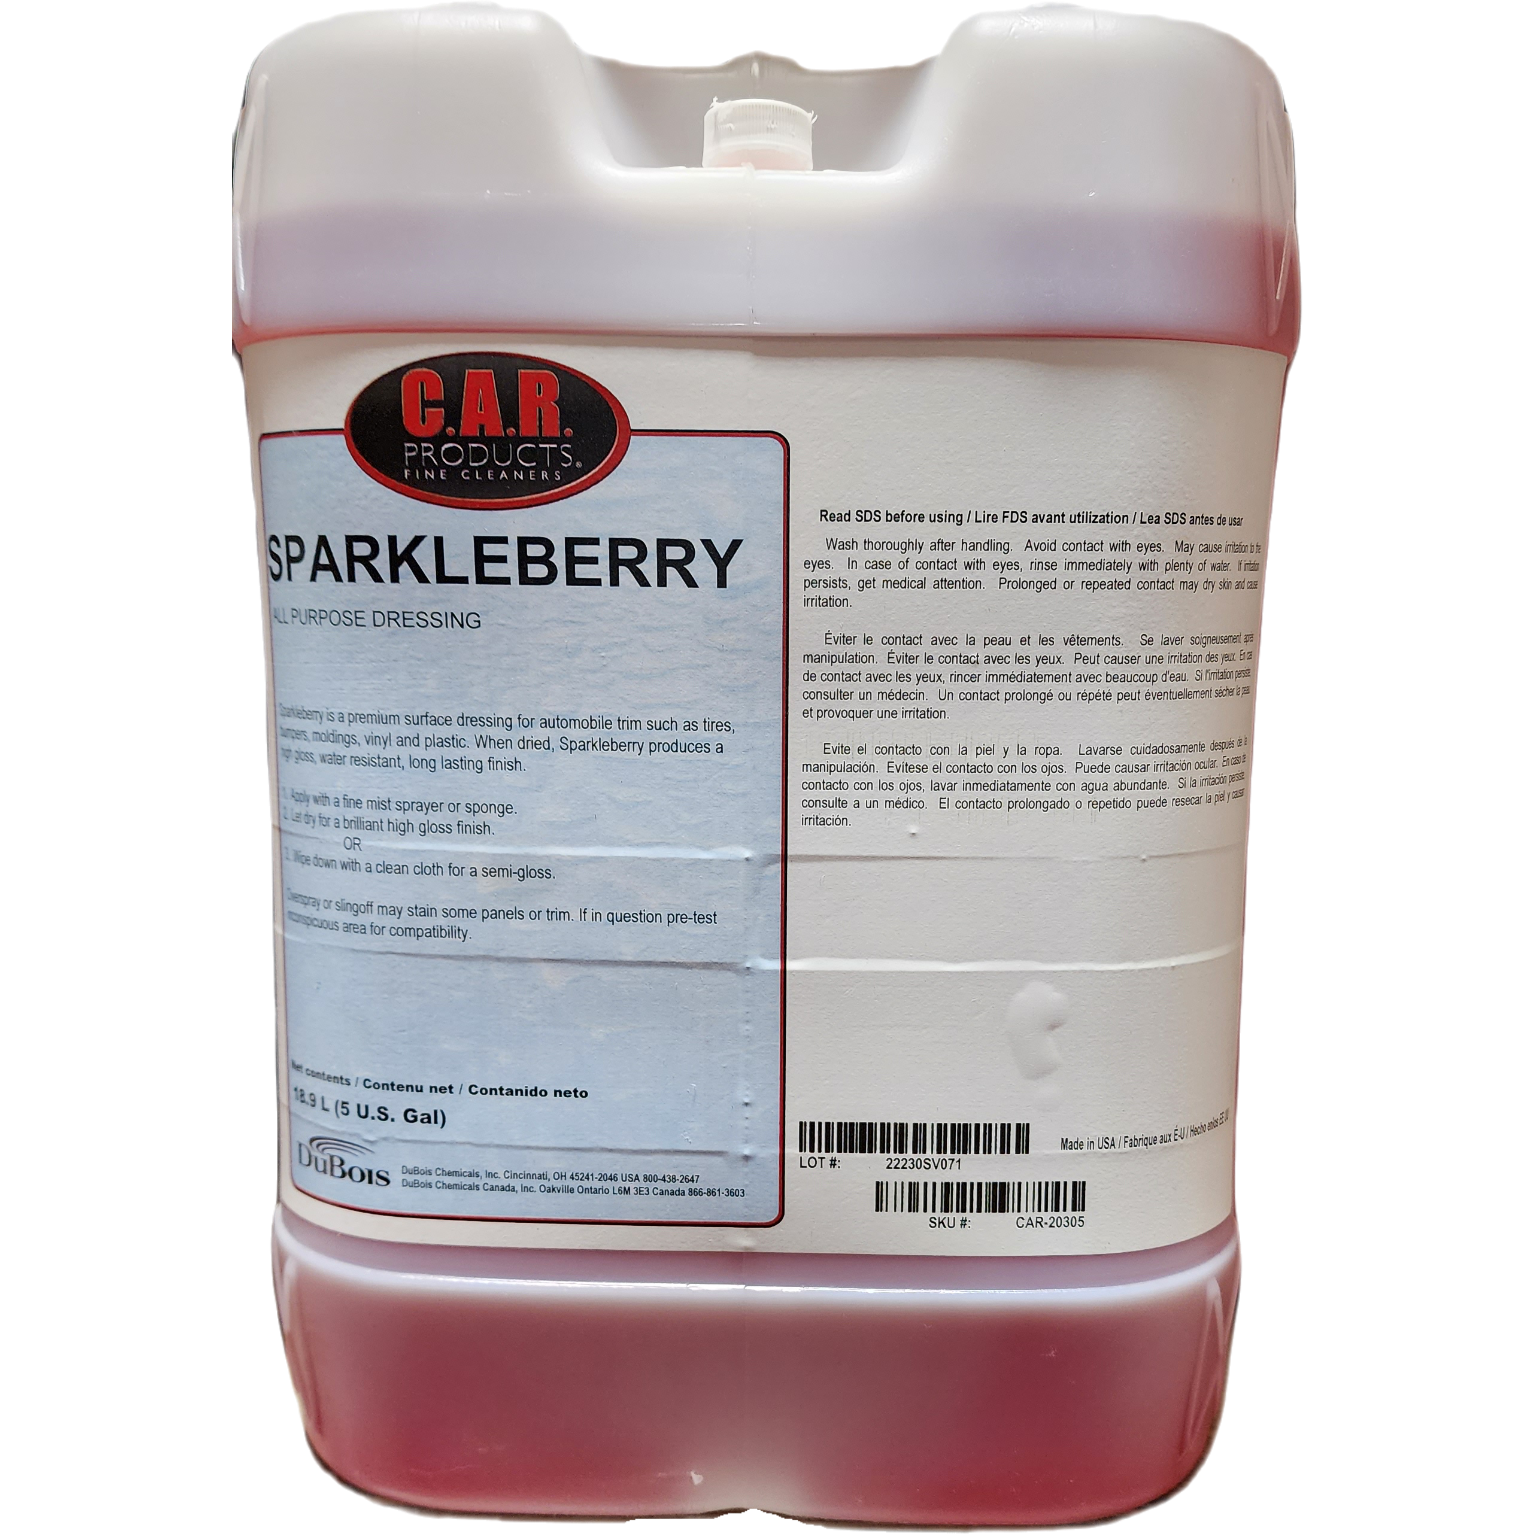 XCP CAR-20305 CAR Products Sparkleberry All Purpose Dressing (5 gal)